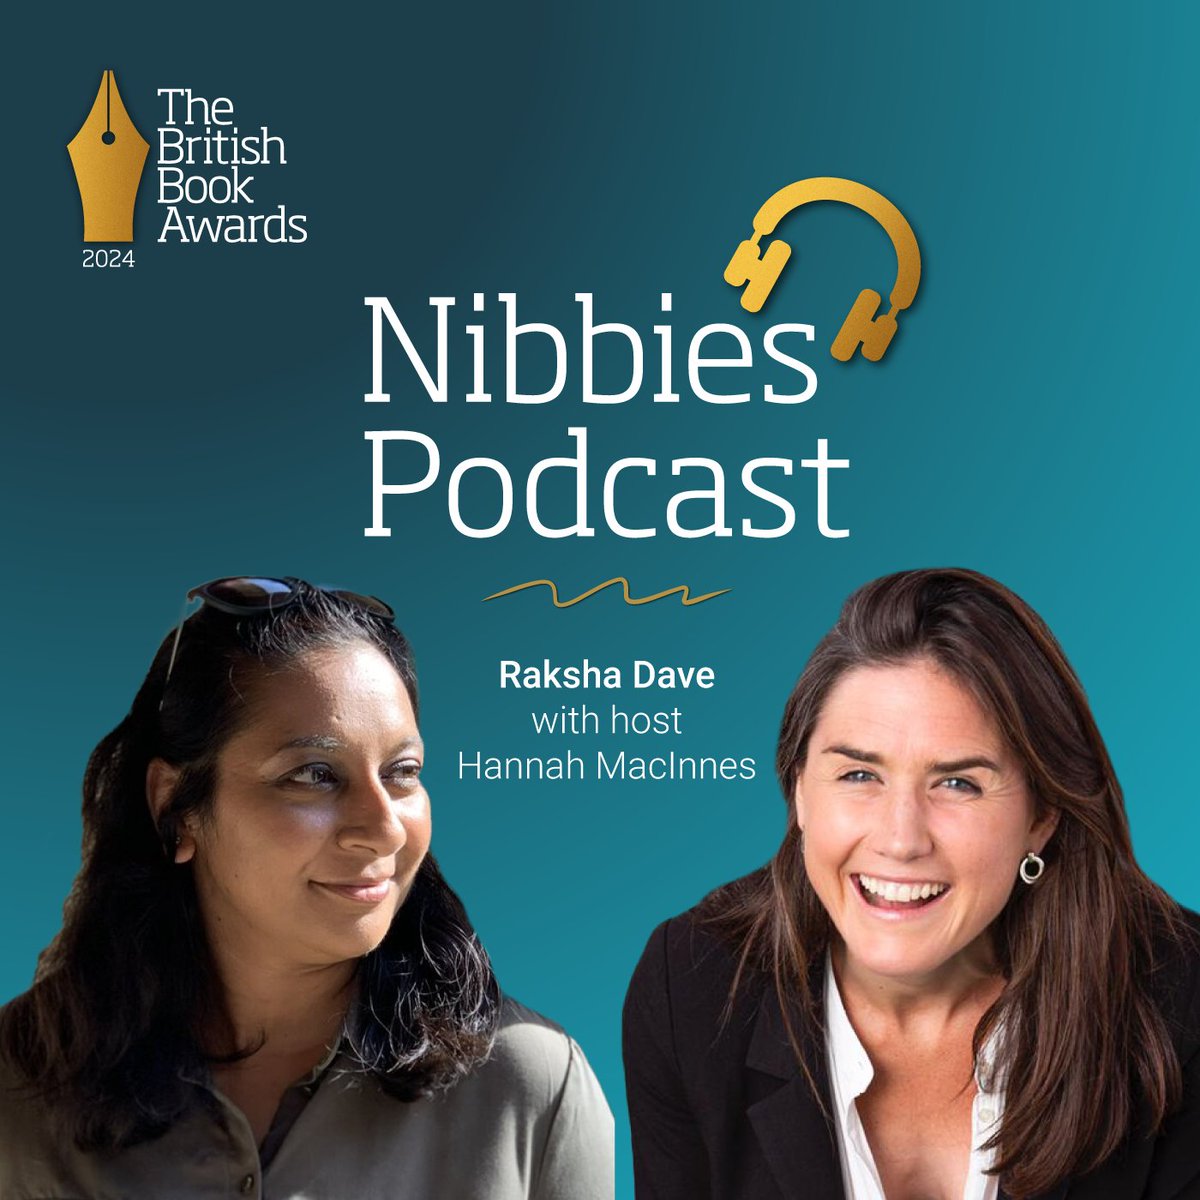 Listen to the brilliant @Raksha_Digs discuss Lessons from Our Ancestors and her exciting #Nibbies nomination with @hannahmacin for the @thebookseller Nibbies Podcast: thebookseller.com/awards/the-bri… #BritishBookAwards